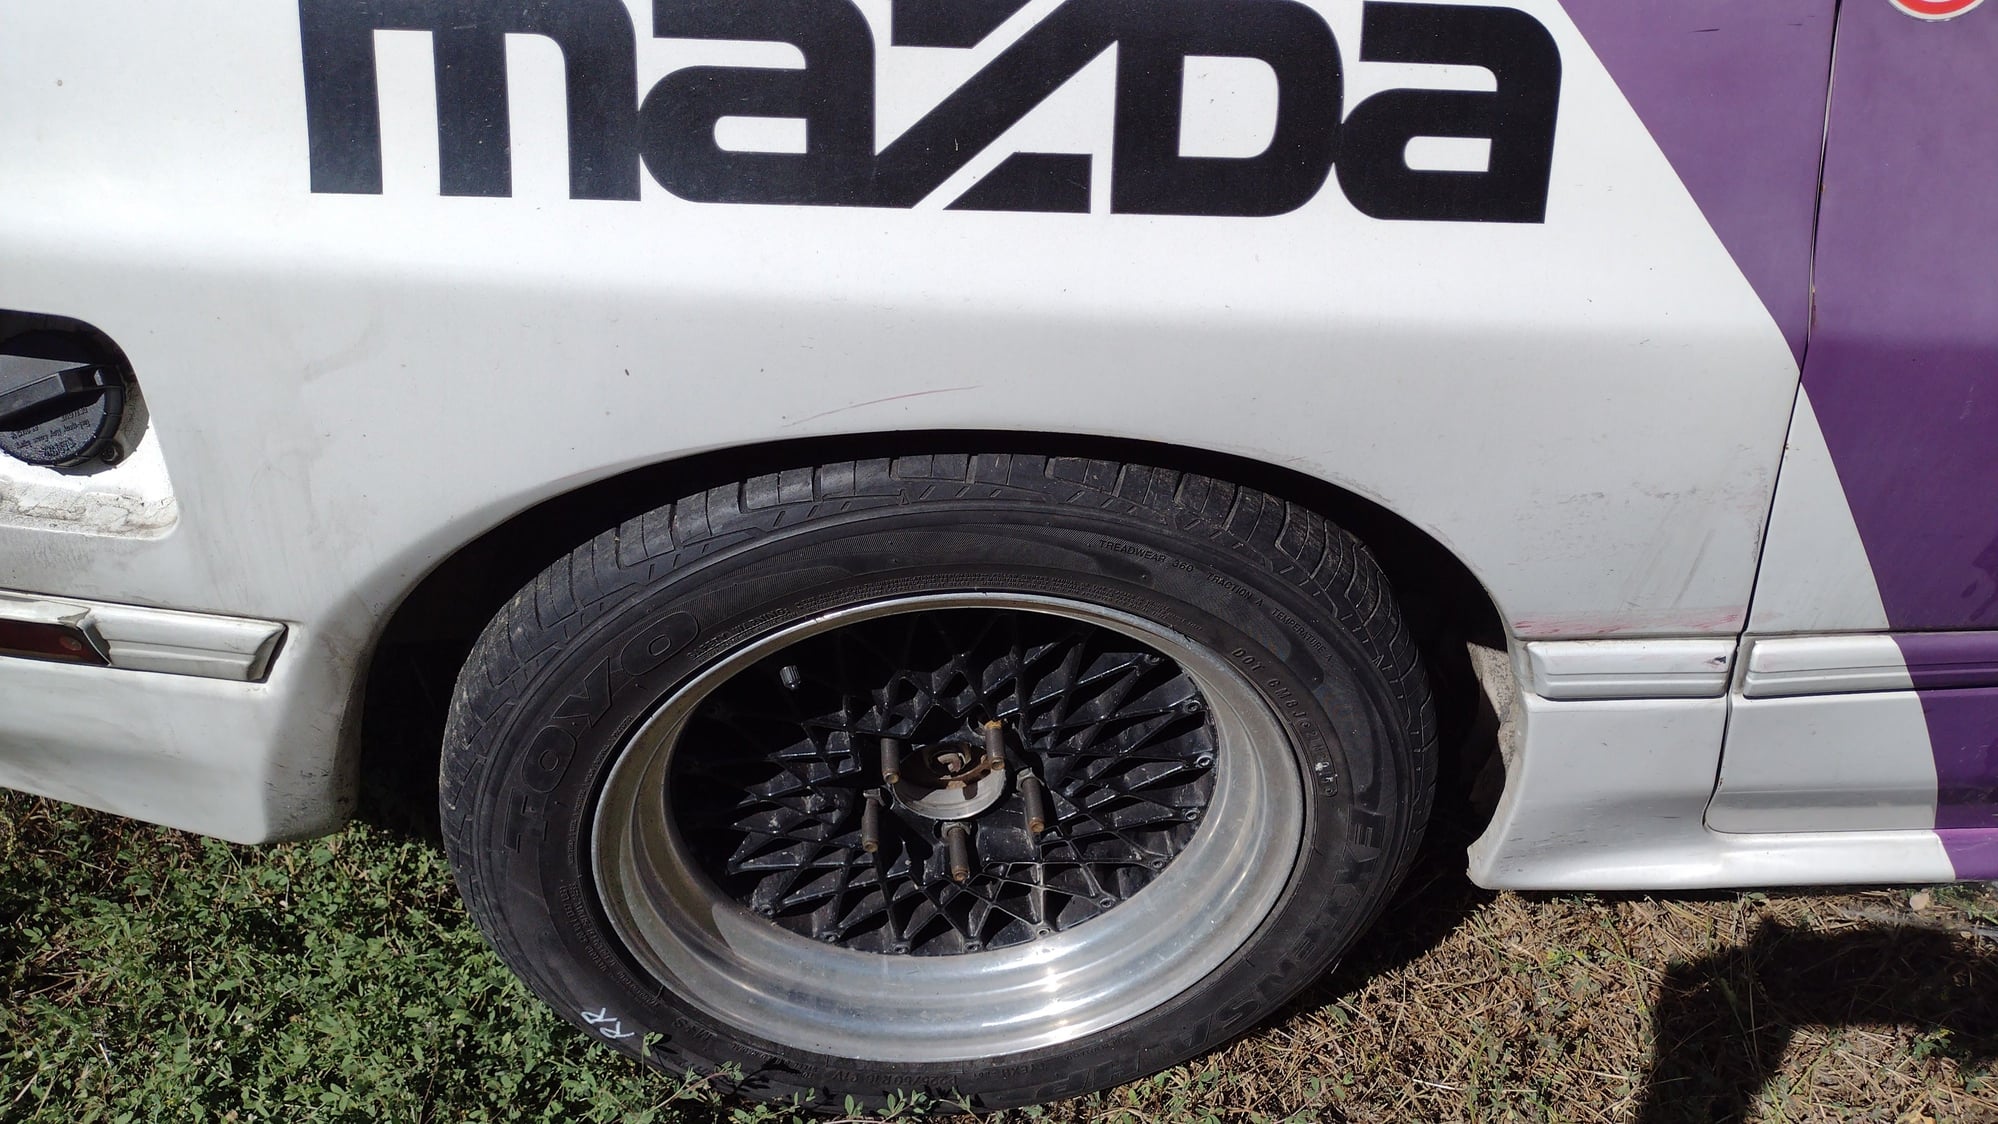 Wheels and Tires/Axles - OLD SCHOOL MESH 16x7 5x114.3 ALUMINUM WHEELS (SET OF 5) - Used - 1986 to 1992 Mazda RX-7 - Del Mar, CA 92014, United States